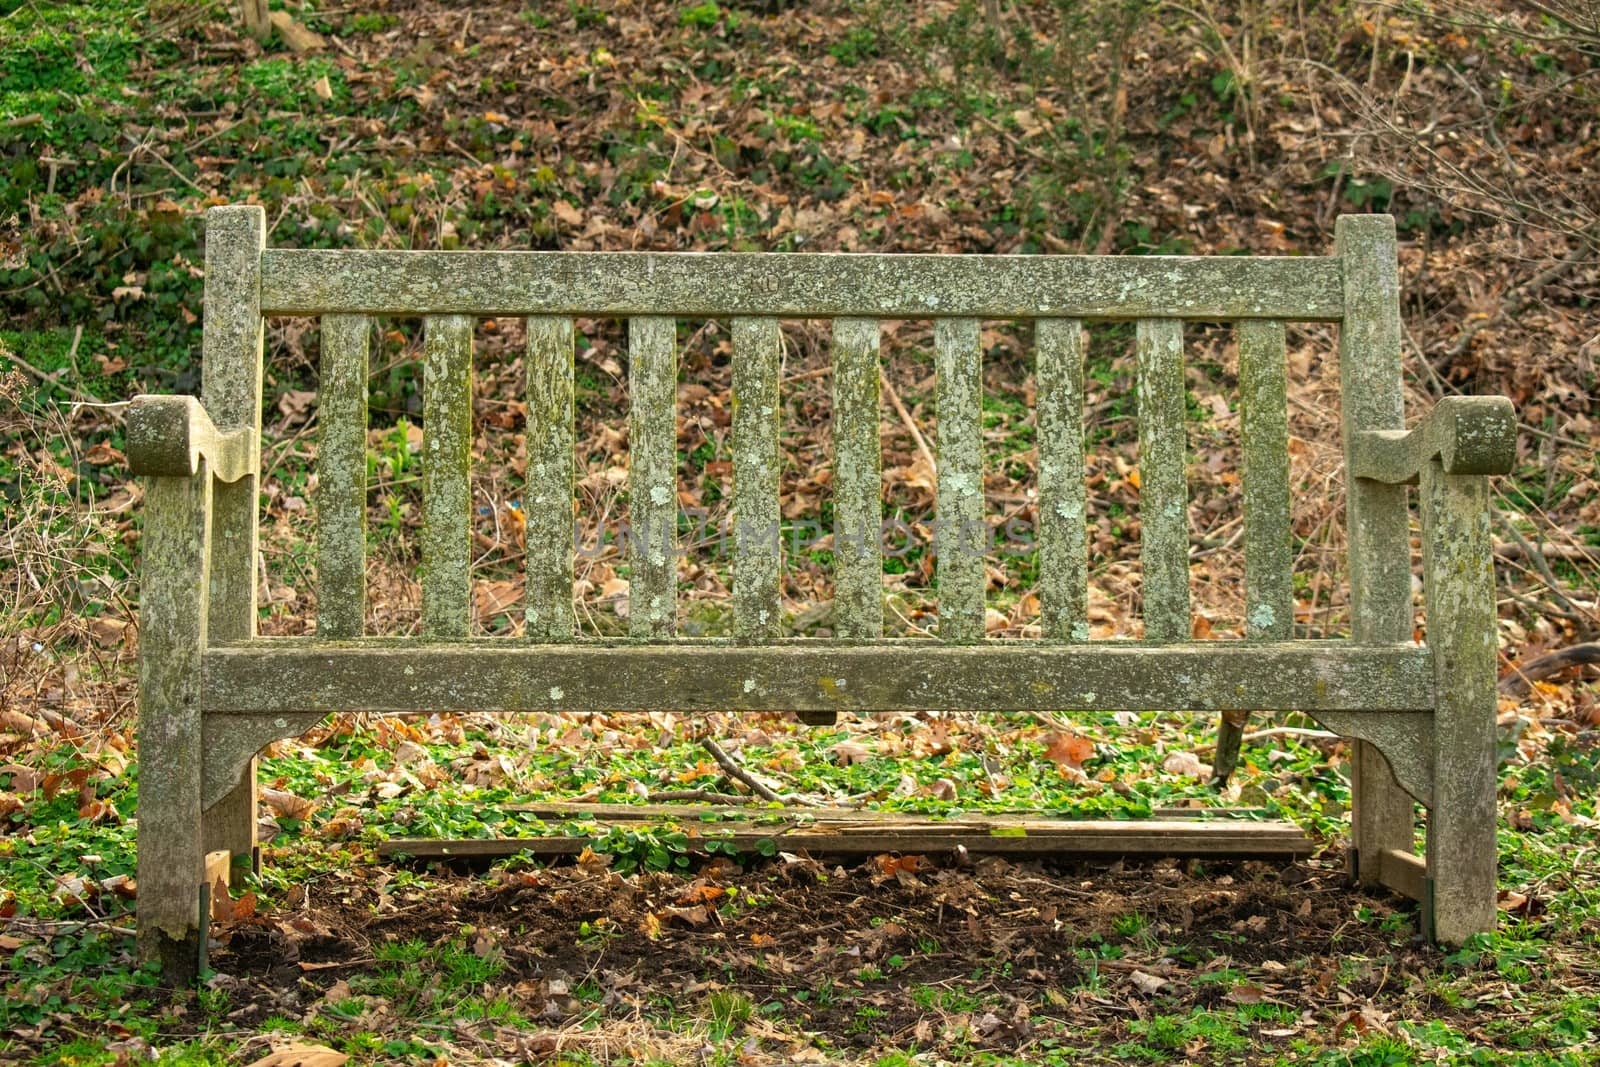 An Old Wooden Park Bench Covered in Moss in a Suburban Park in Pennsylvania